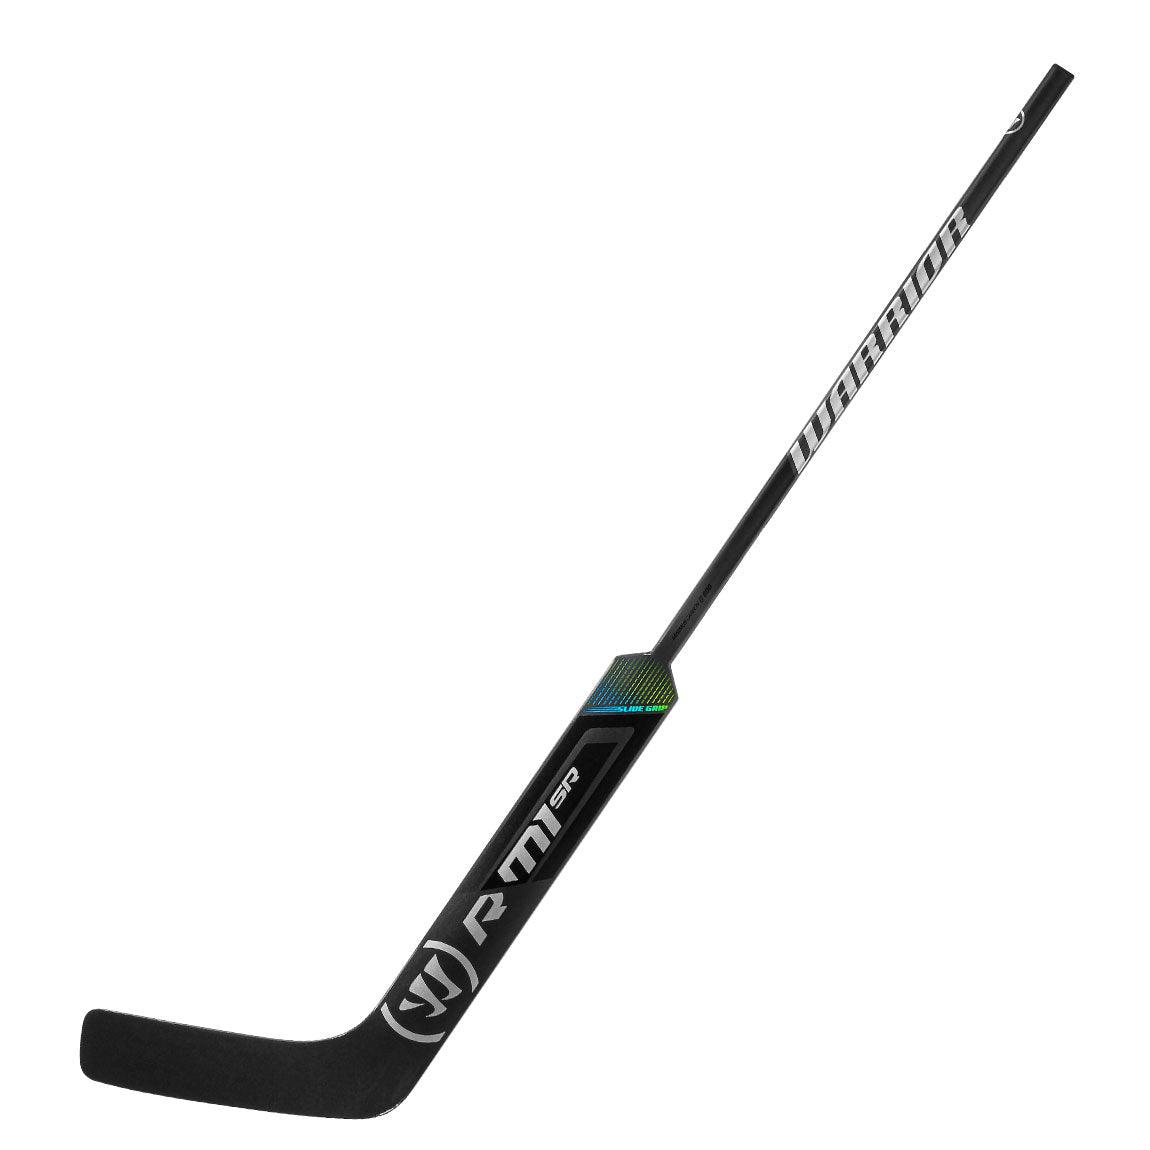 Ritual M1 Goalie Stick - Youth - Sports Excellence